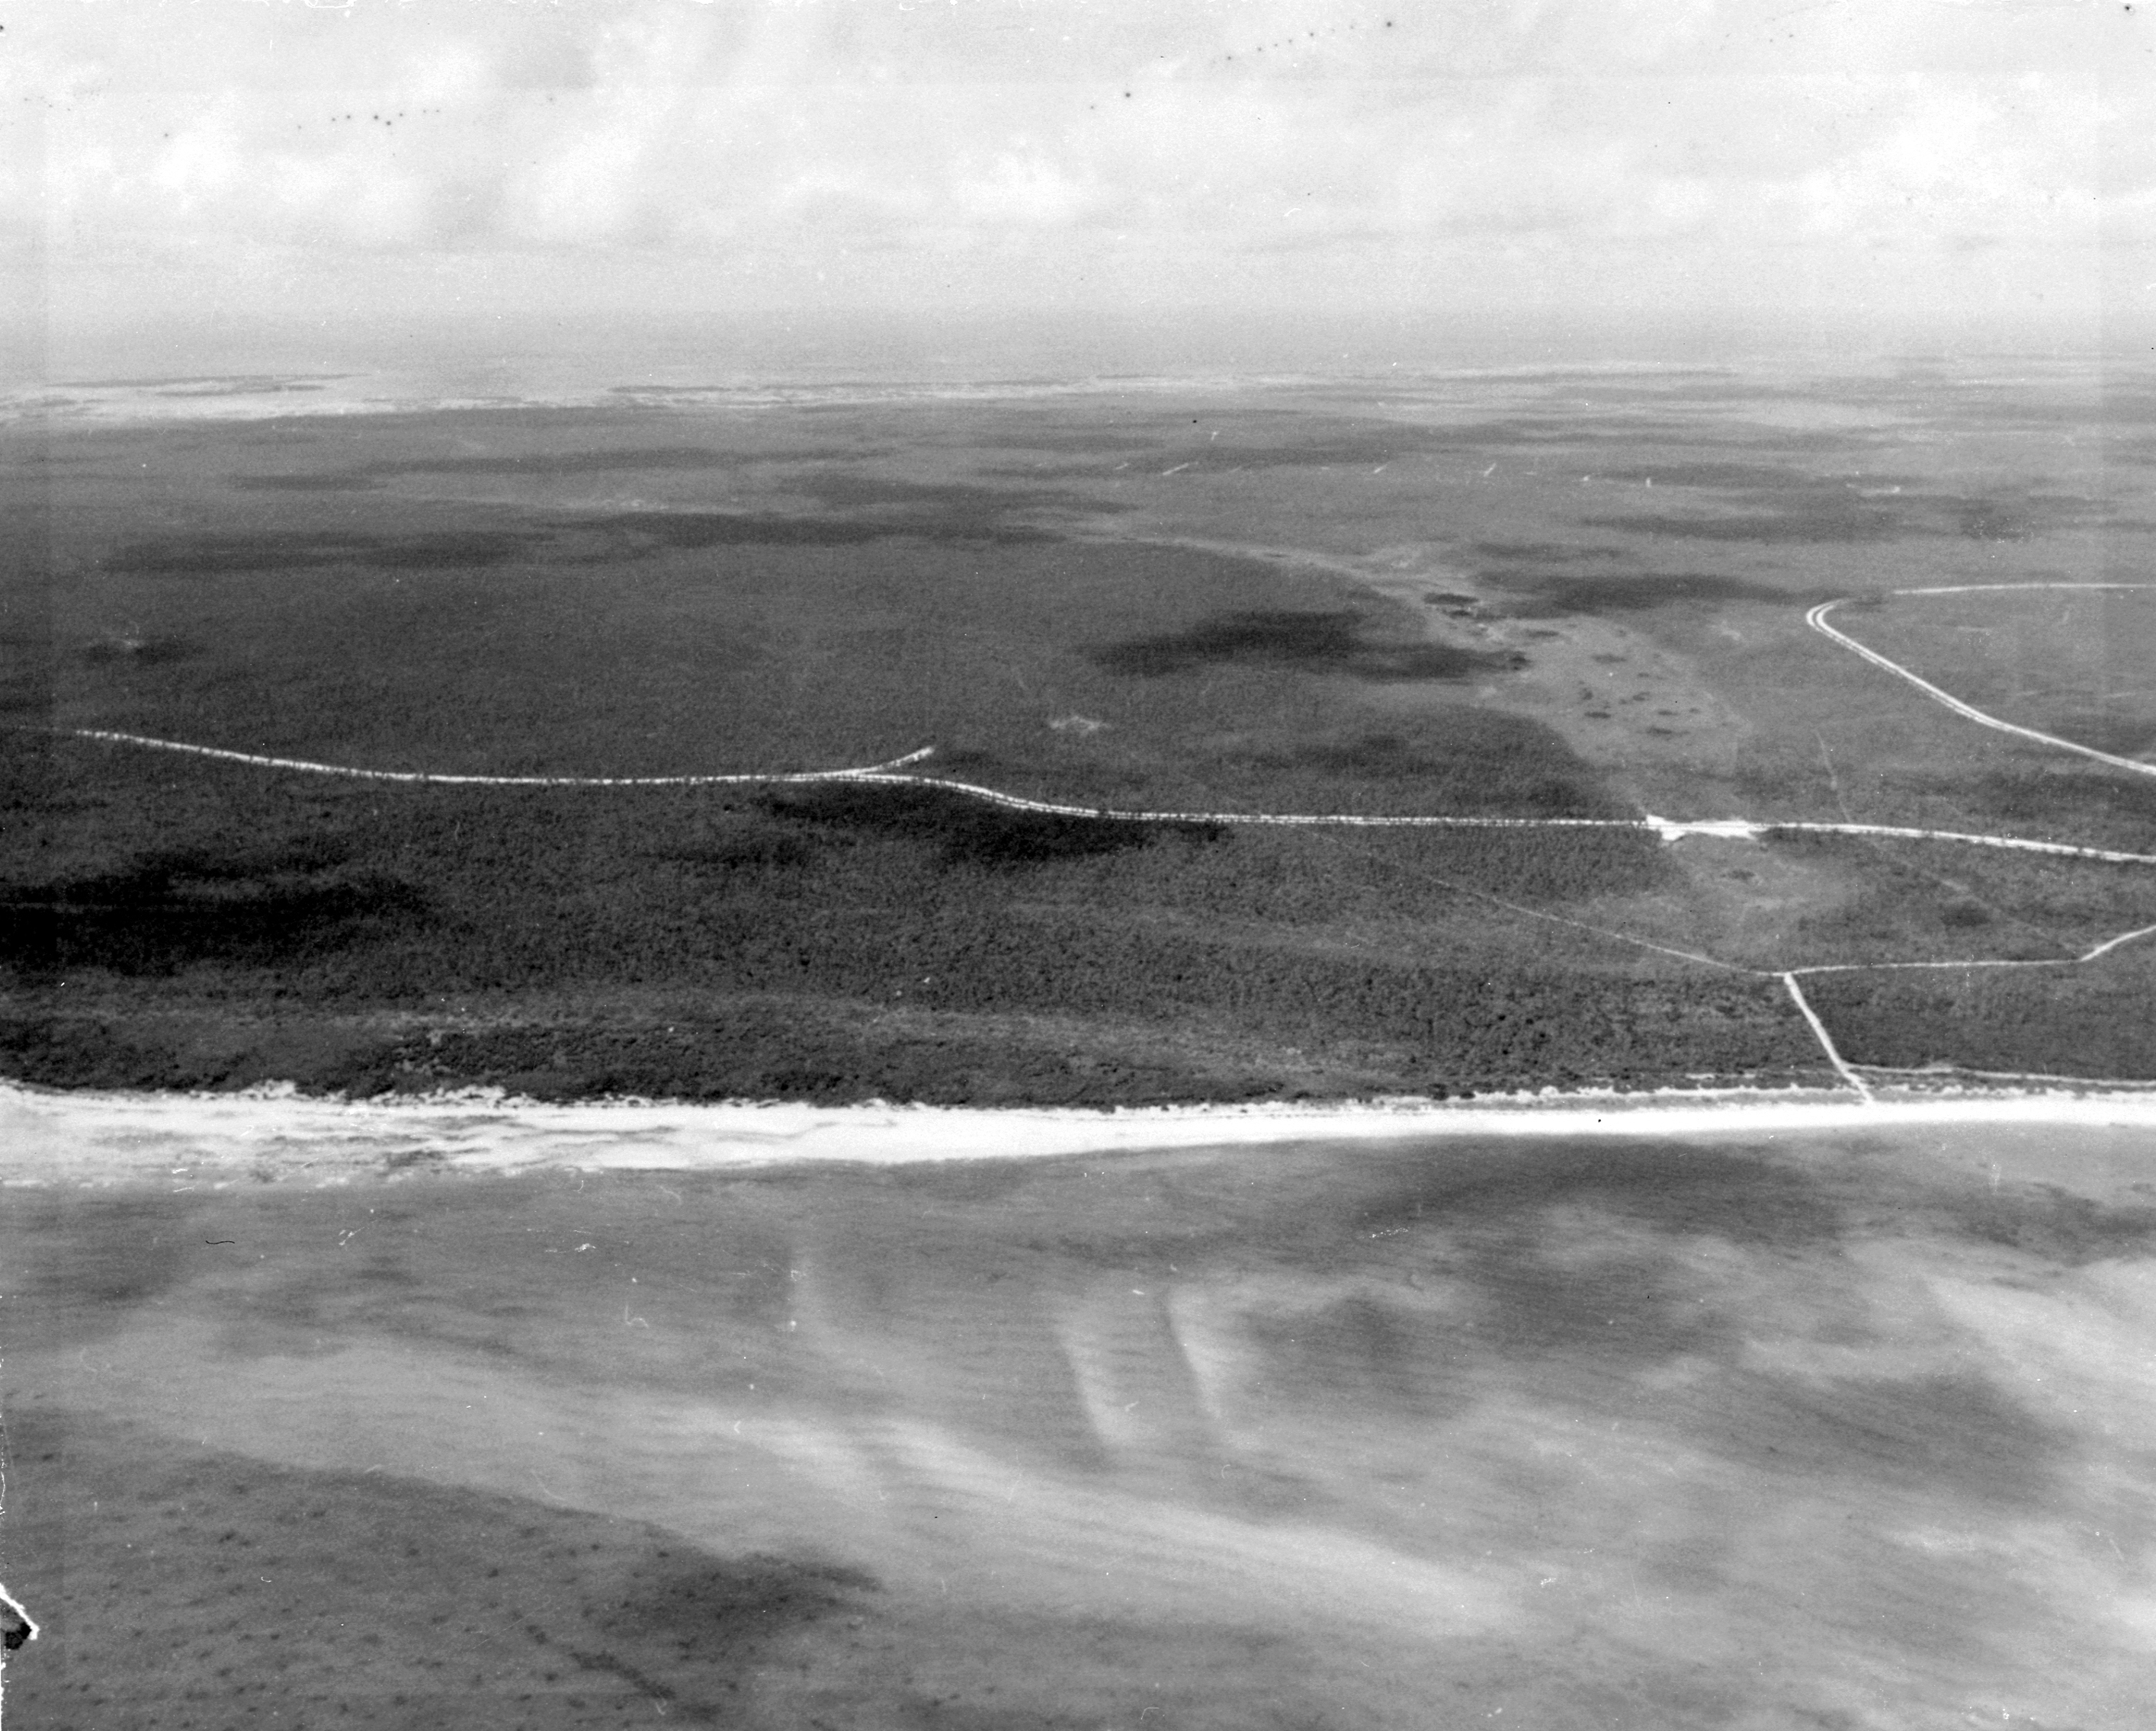 The "Great Slough" prior to the construction of the Grand Lucayan Waterway, July 1967